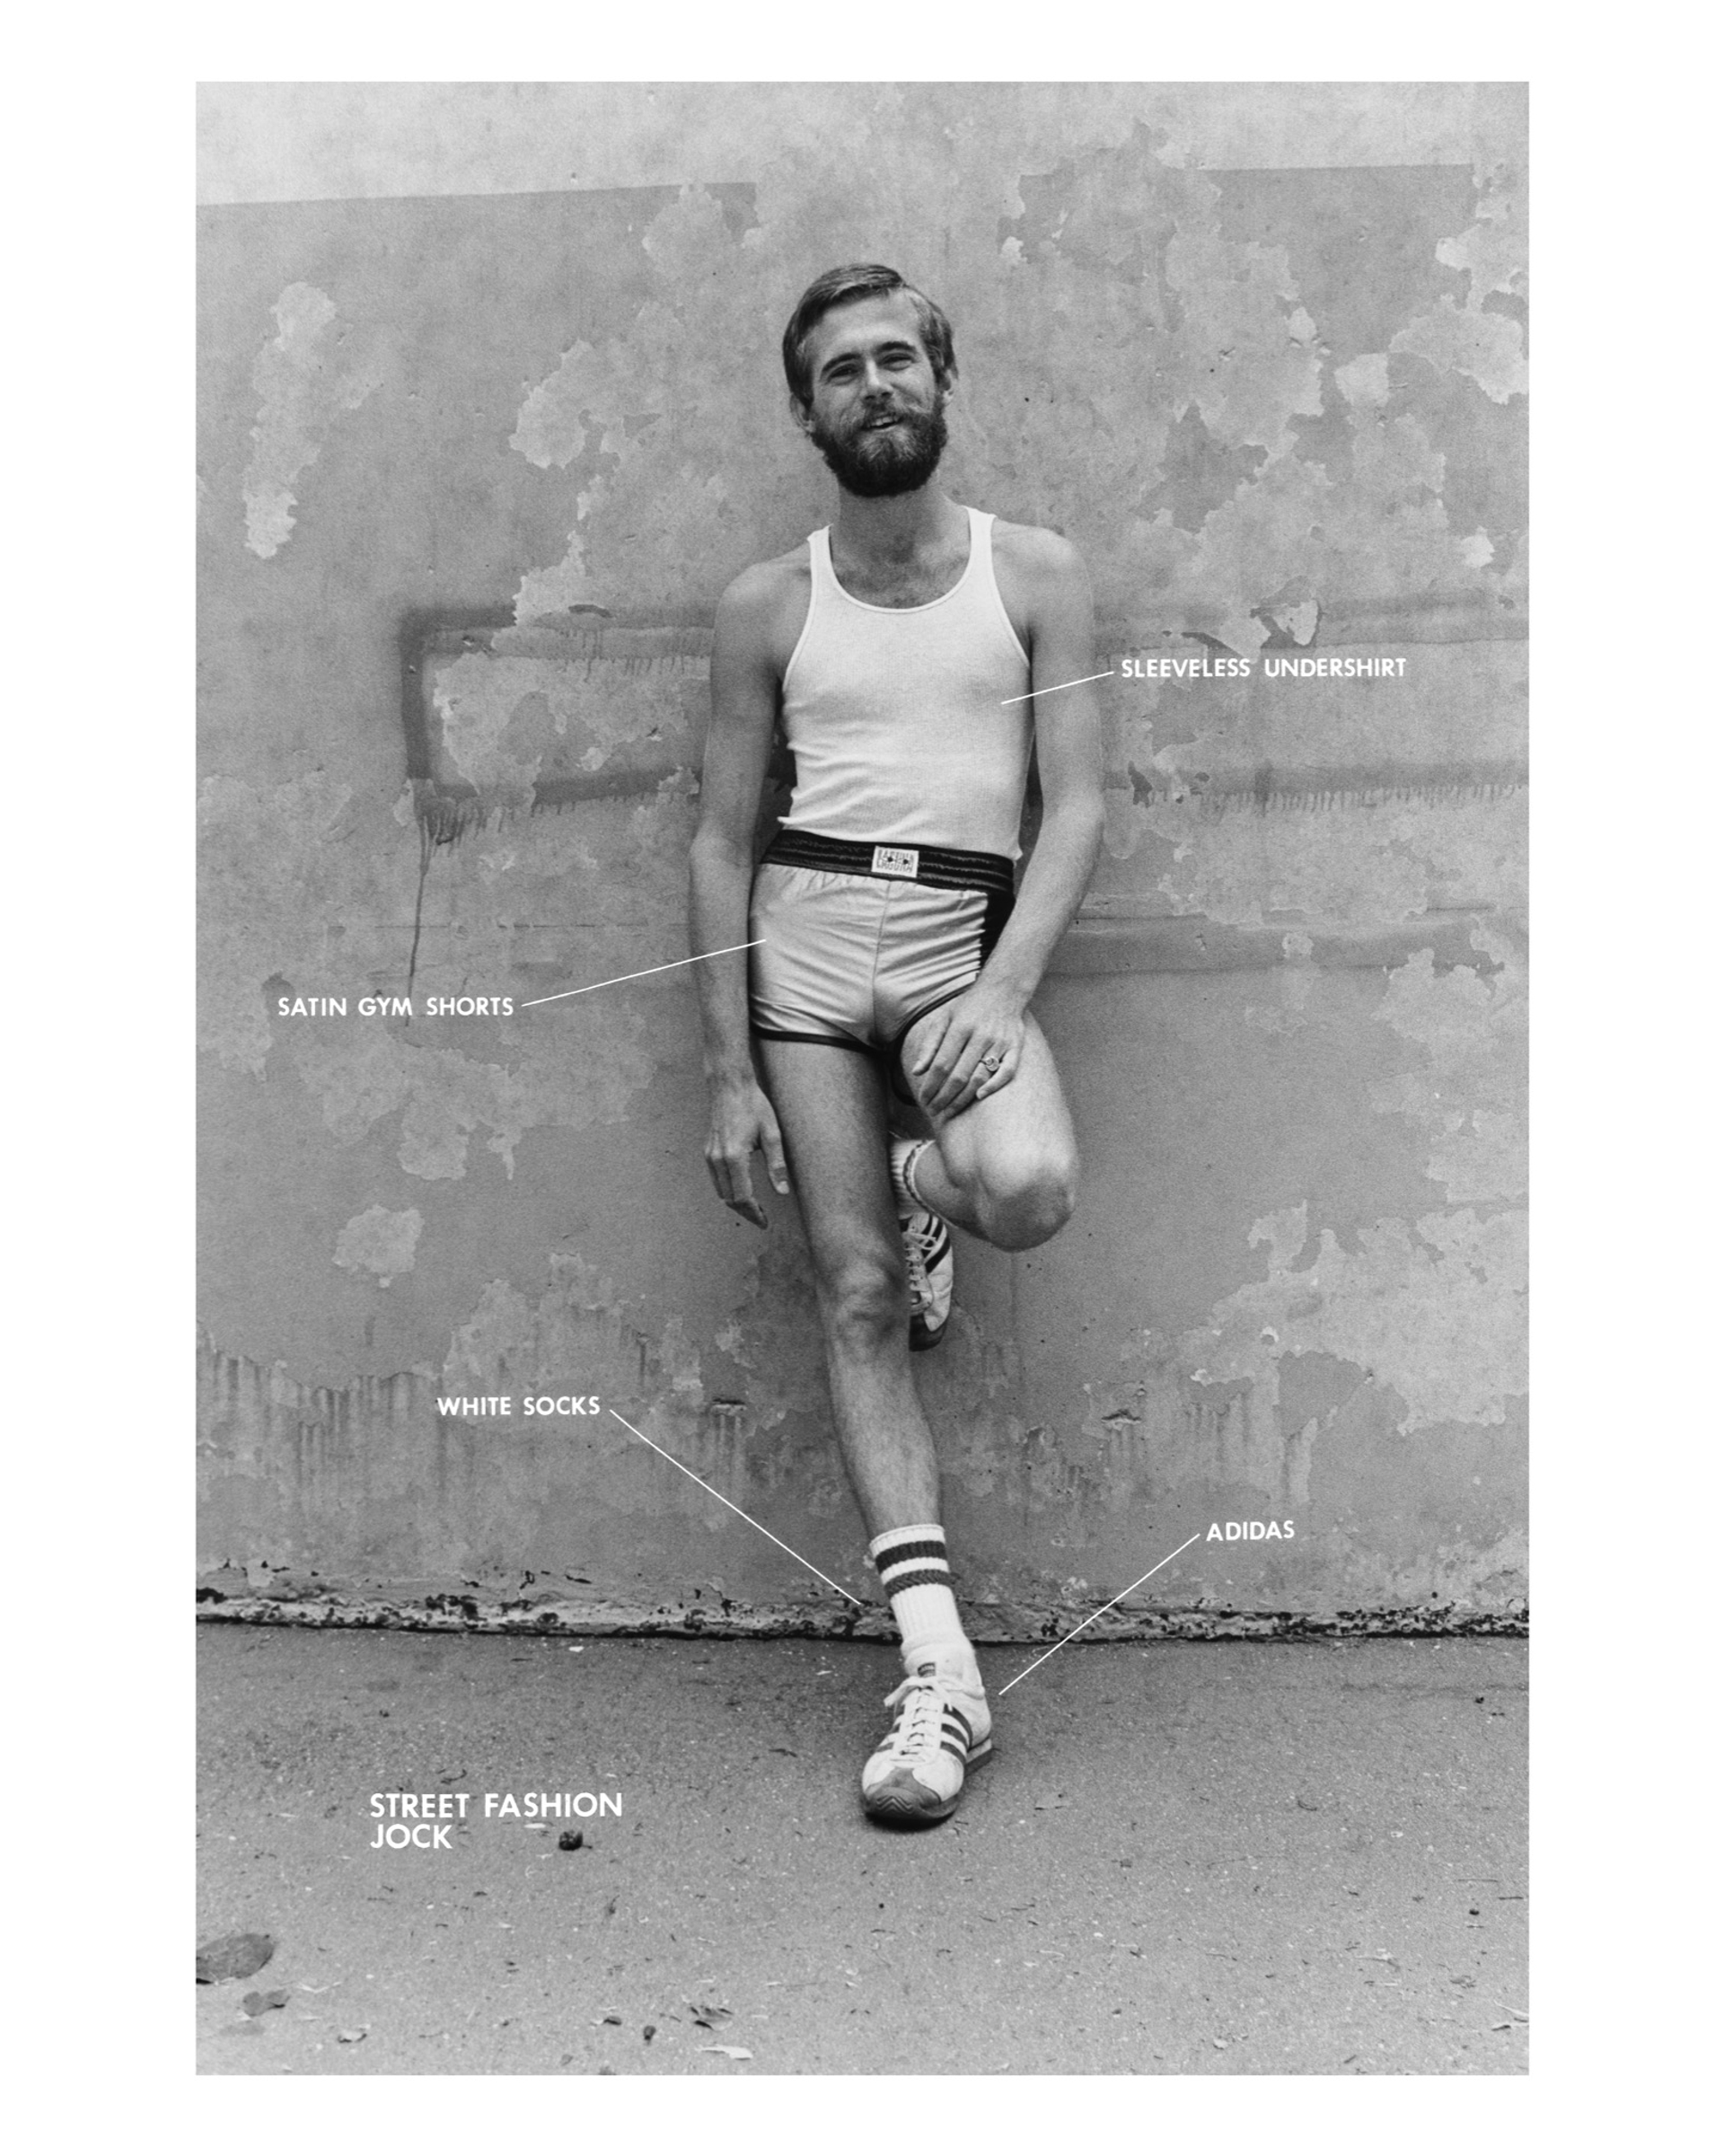 Hal Fischer, Street Fashion: Jock from the series Gay Semiotics, 1977/2016 Courtesy of the artist and Project Native Informant London